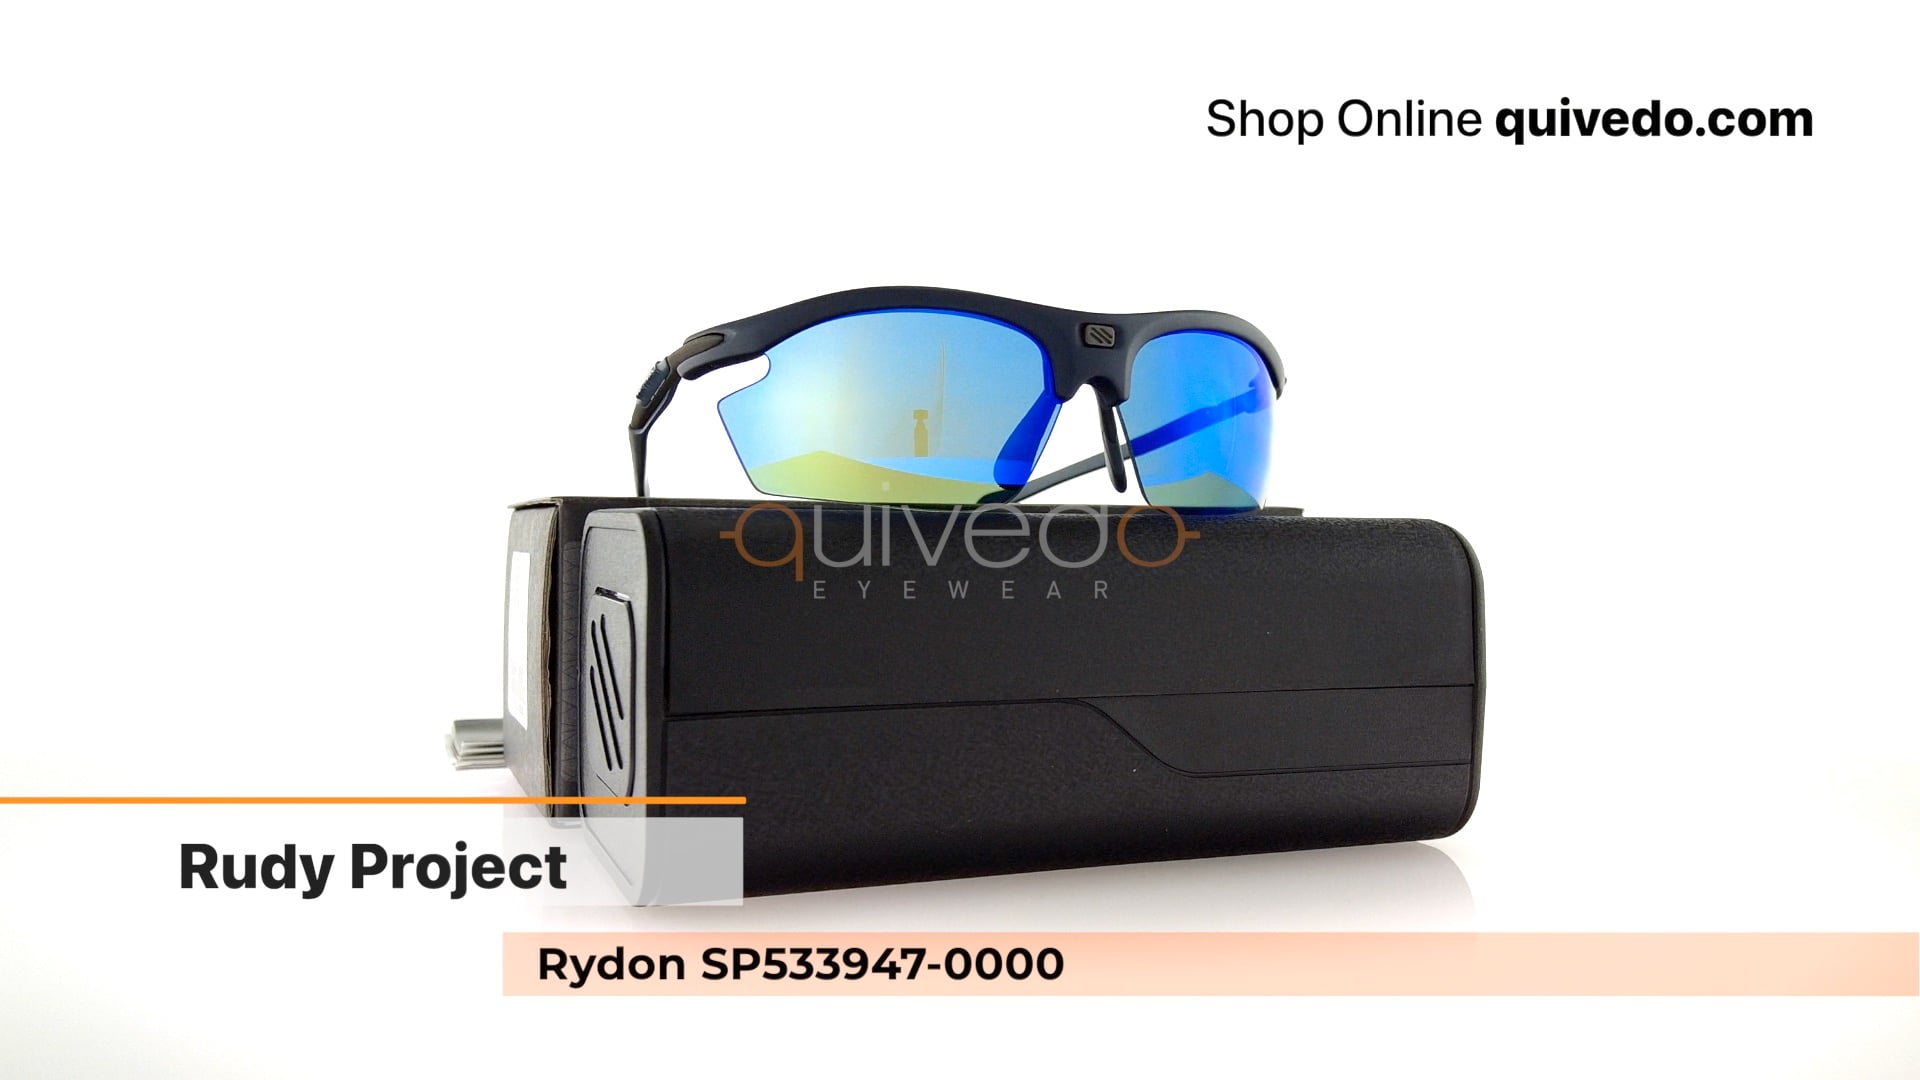 Rudy Project Rydon SP533947-0000